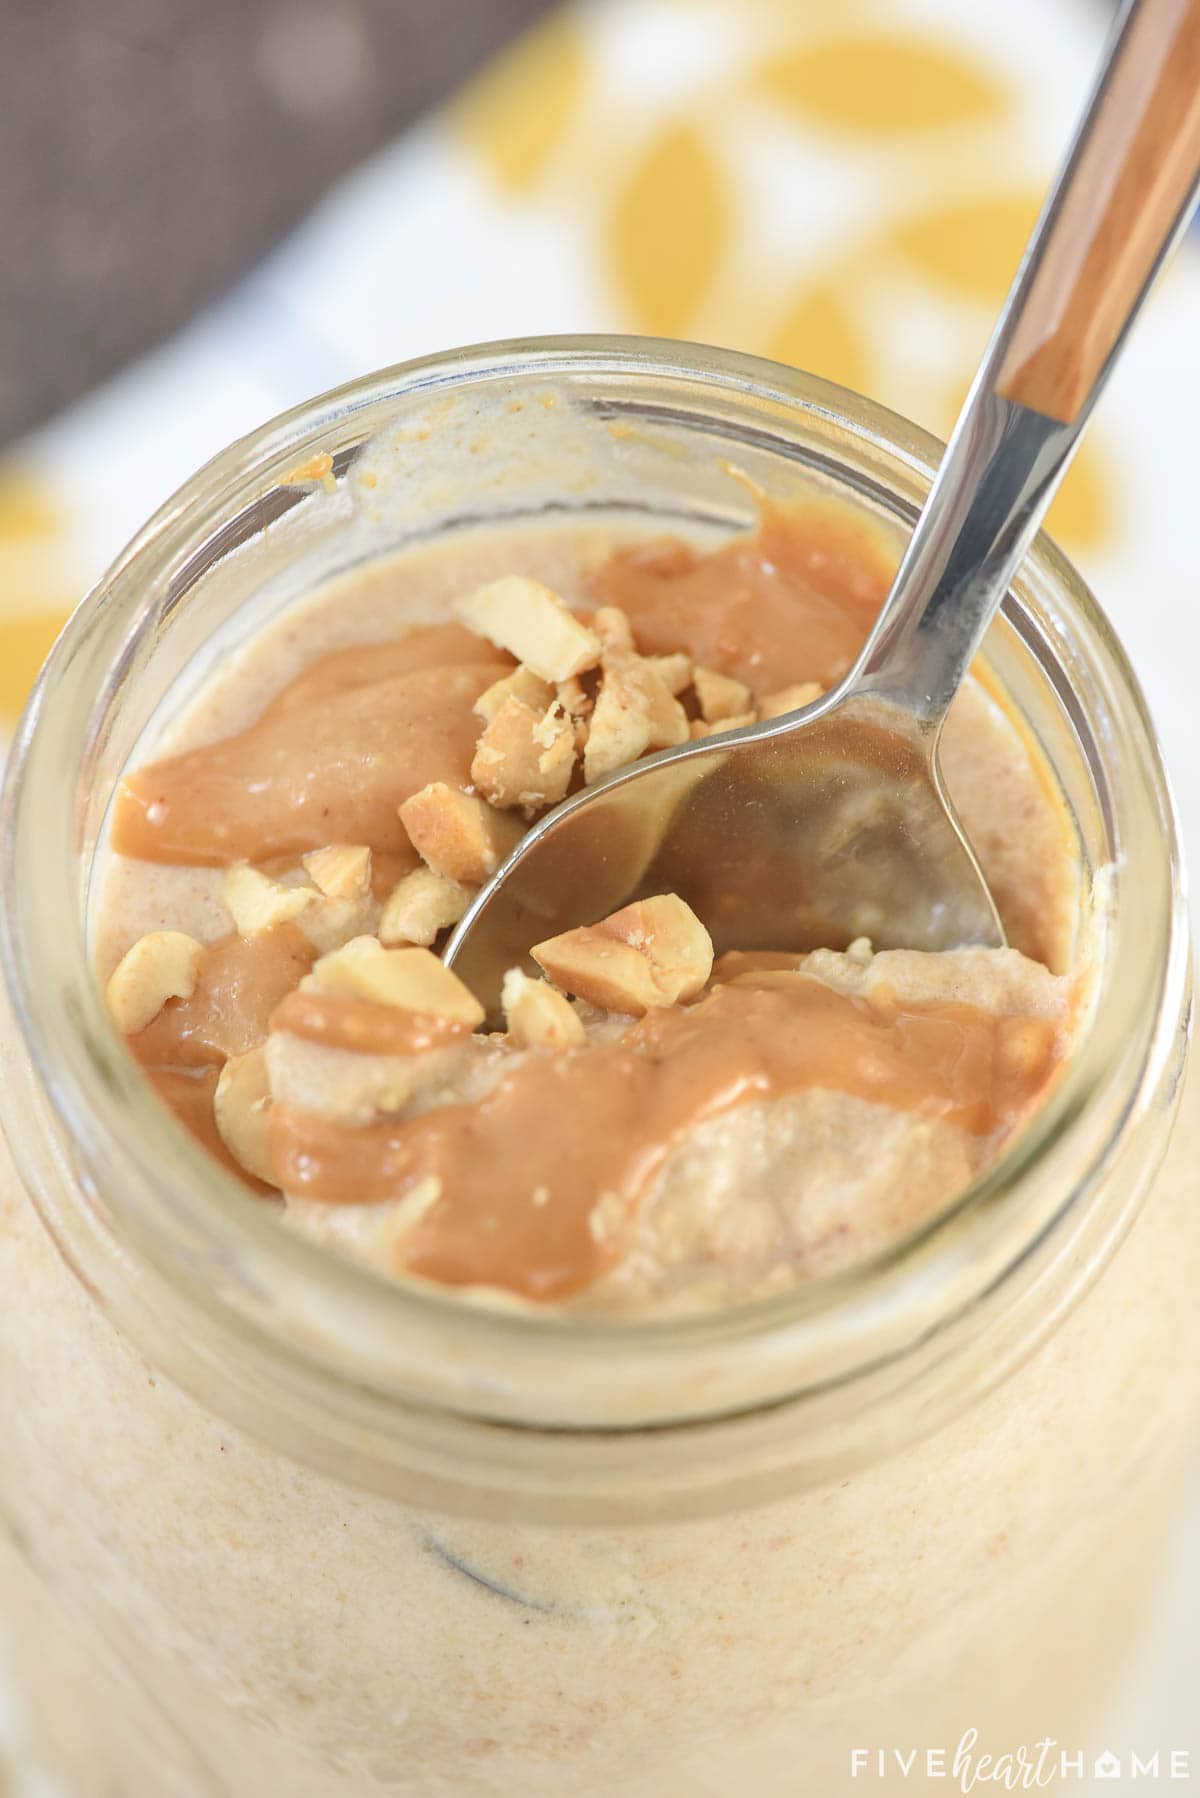 Peanut Butter Overnight Oats close-up with spoon digging in.